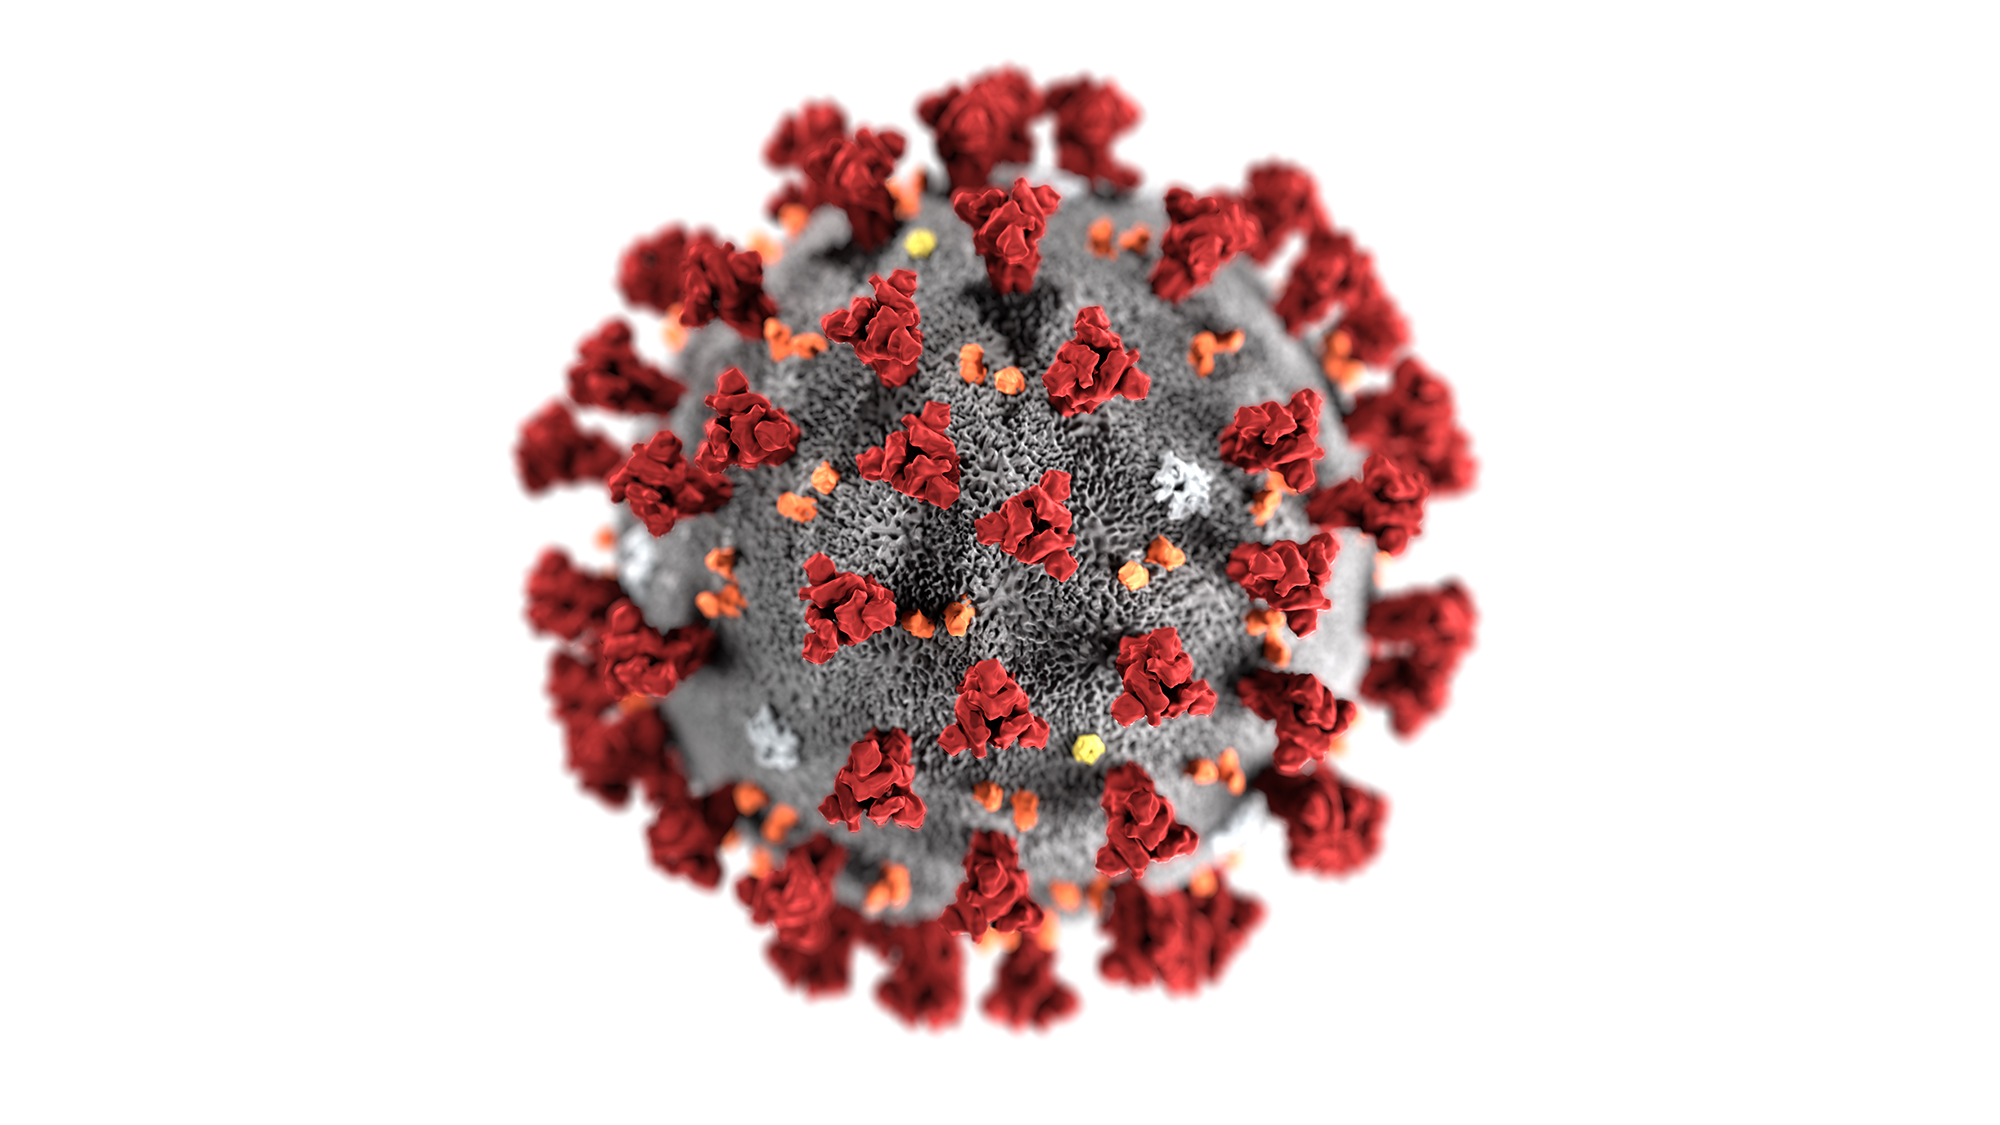 Maxi Mind Learning’s Response to the COVID-19 Virus